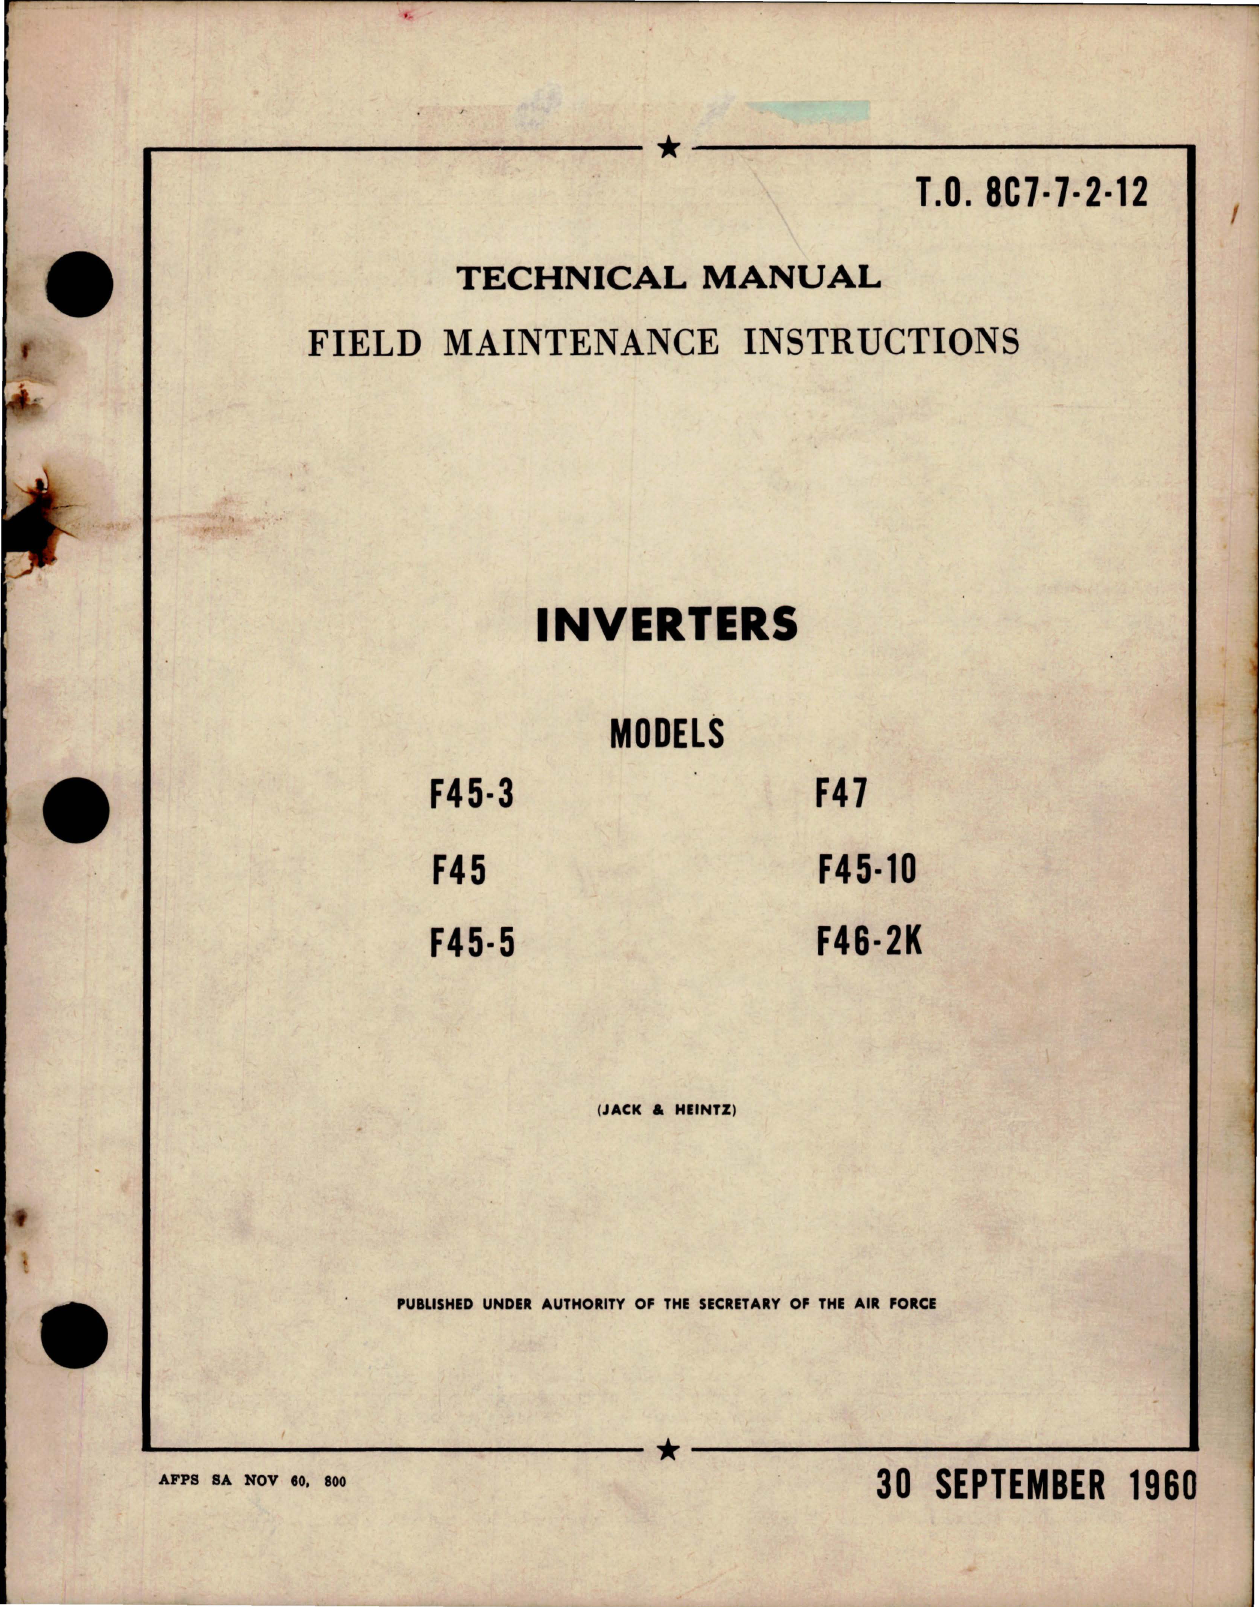 Sample page 1 from AirCorps Library document: Maintenance Instructions for Inverter - Models F45-3, F45, F45-5, F47, F45-10 and F46-2K